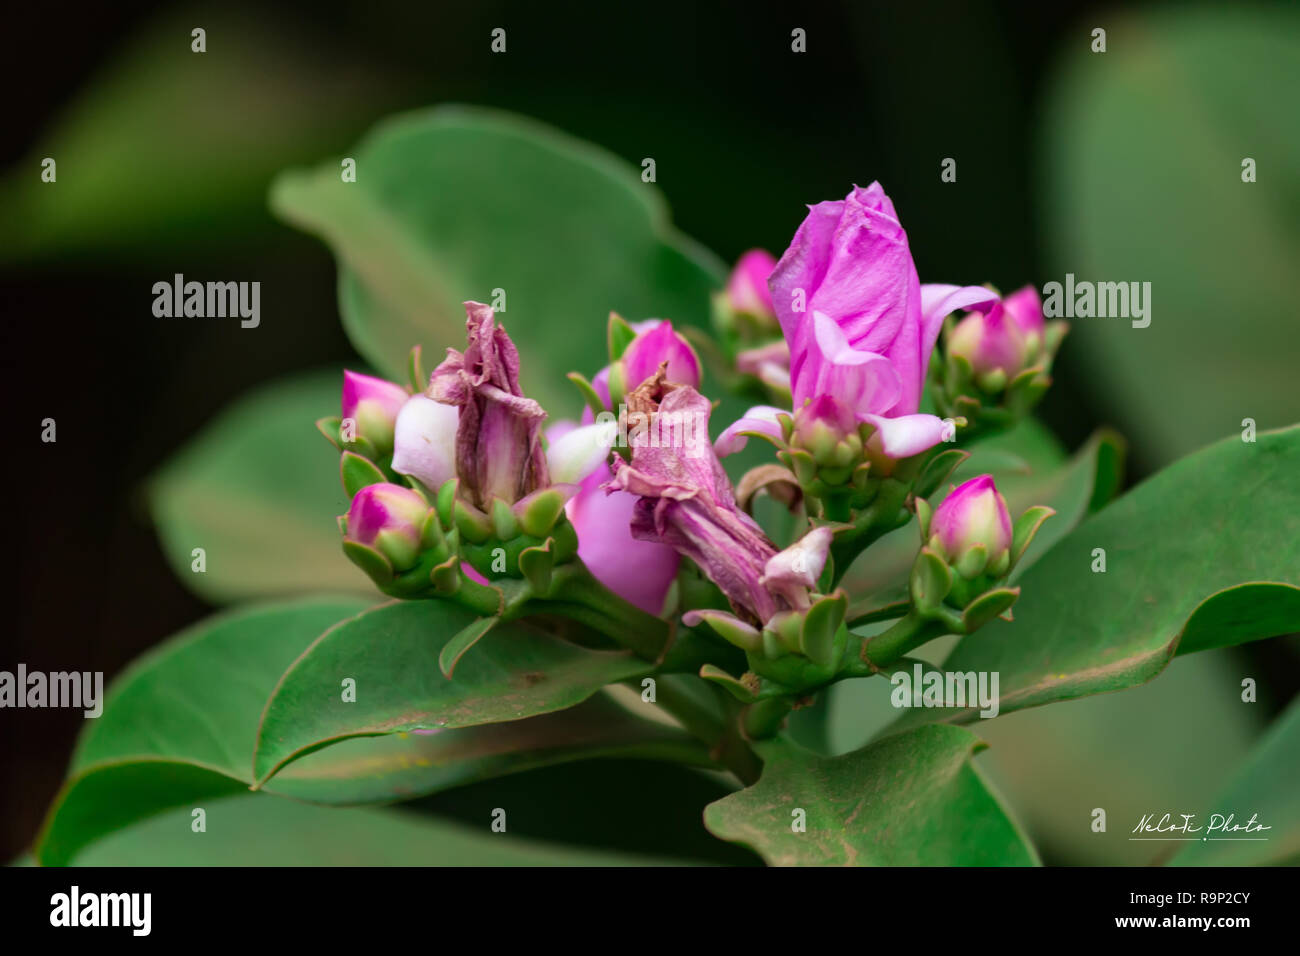 Pereskia bleo or Wax Rose flower.It's a kind of Cactus flower Stock Photo